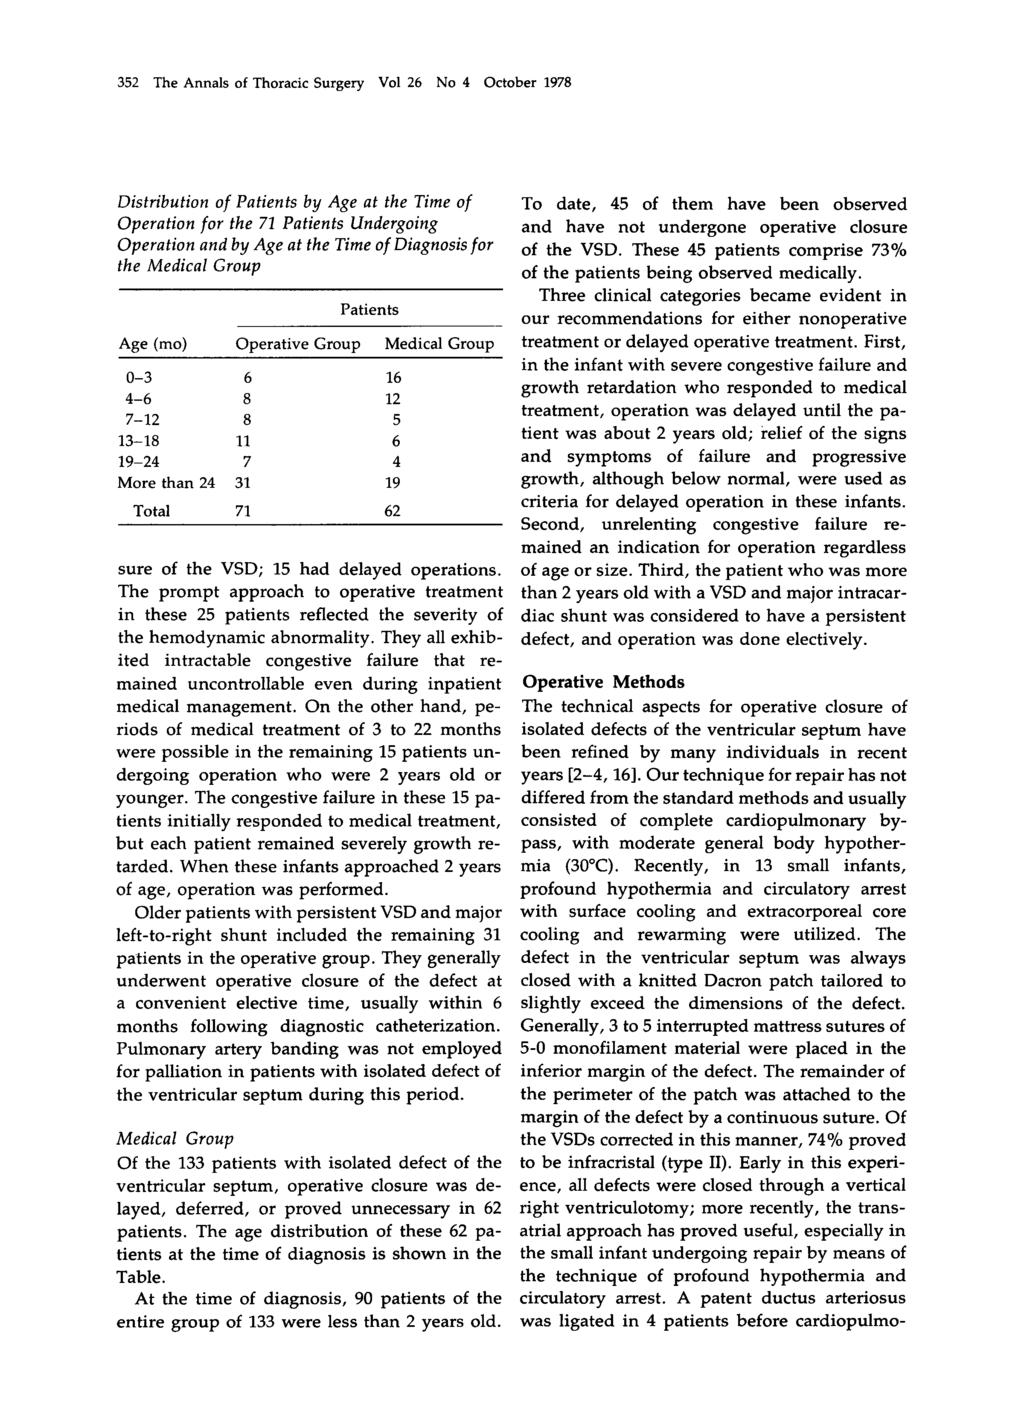 352 The Annals of Thoracic Surgery Vol 26 No 4 October 1978 Distribution of Patients by Age at the Time of Operation for the 71 Patients Undergoing Operation and by Age at the Time of Diagnosis for